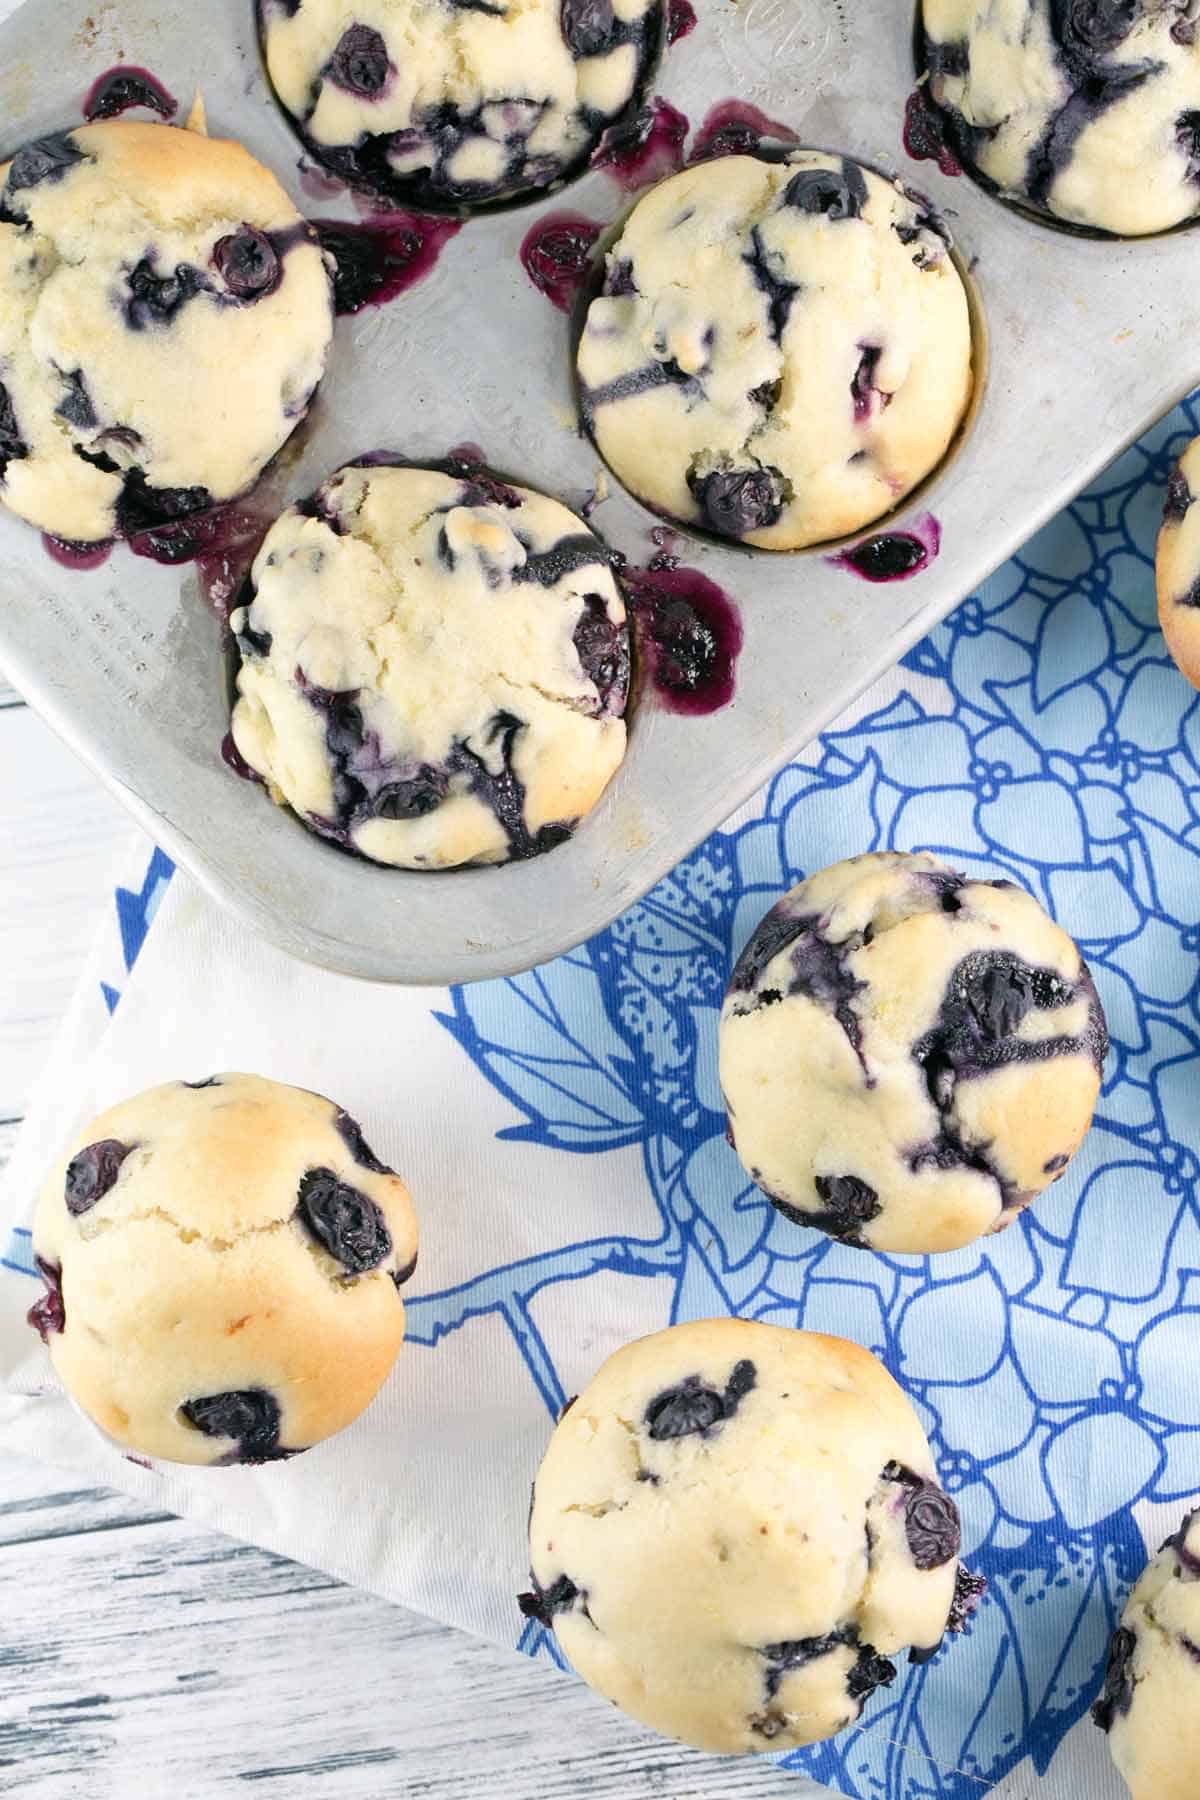 Low Sugar Skinny Blueberry Muffins: trade in your jumbo sugary muffin for a skinny blueberry muffin. All the great blueberry taste you love with none of the guilty. {Bunsen Burner Bakery} #muffins #blueberrymuffins #breakfast #skinnymuffins